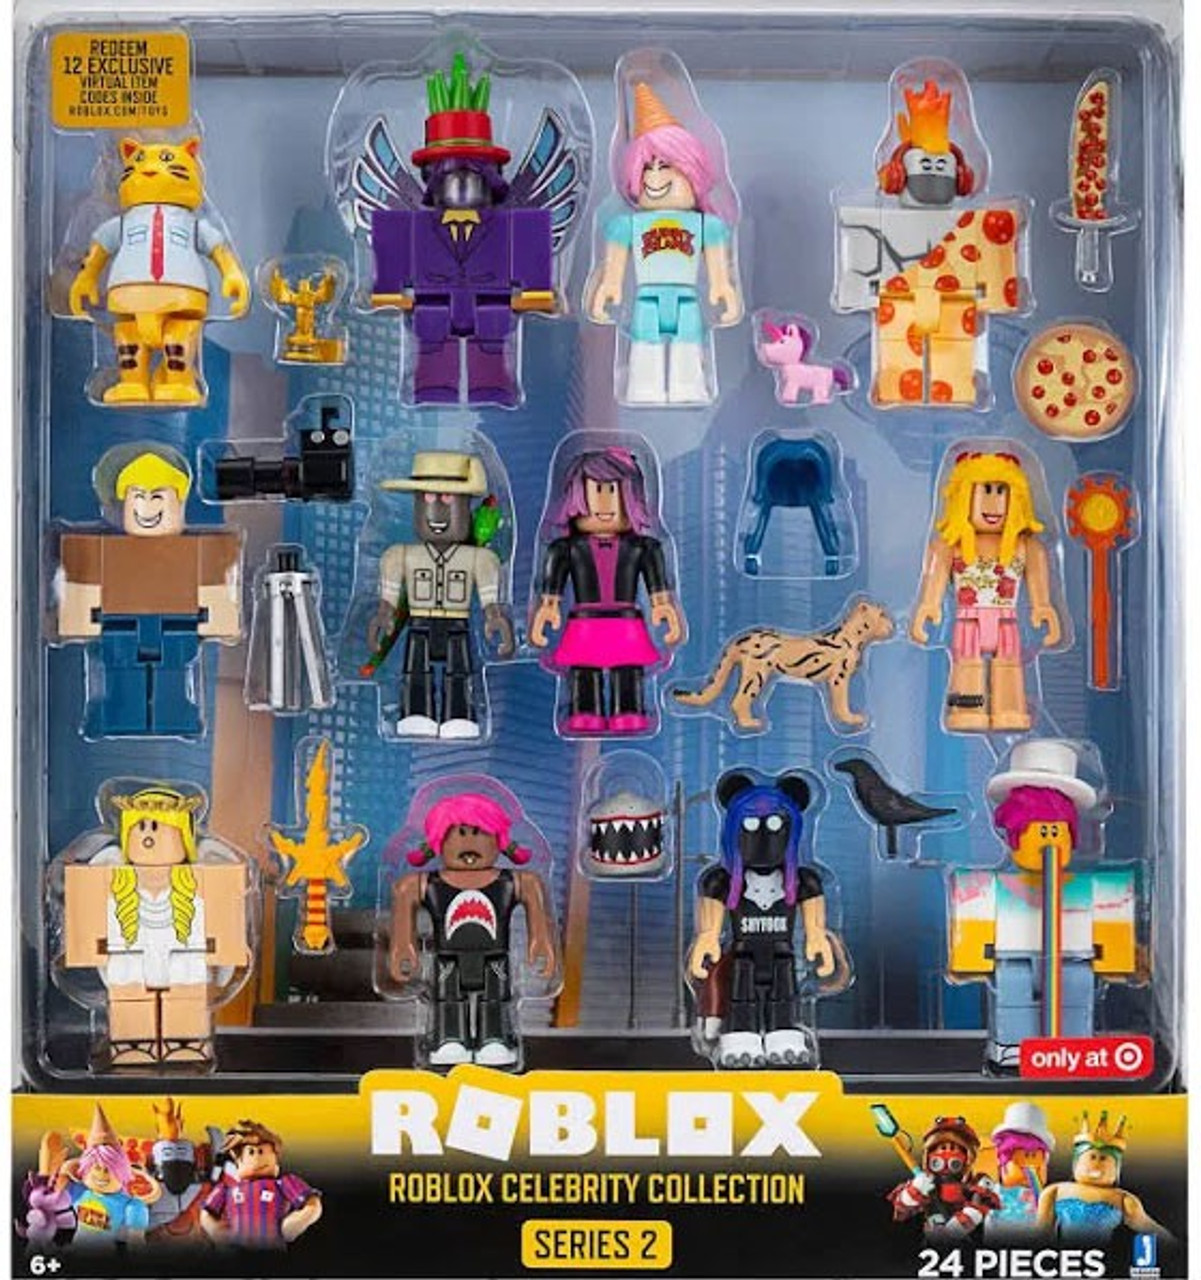 Roblox Series 2 Celebrity Collection Exclusive Action Figure 12 Pack Damaged Package - robloxian 20 package